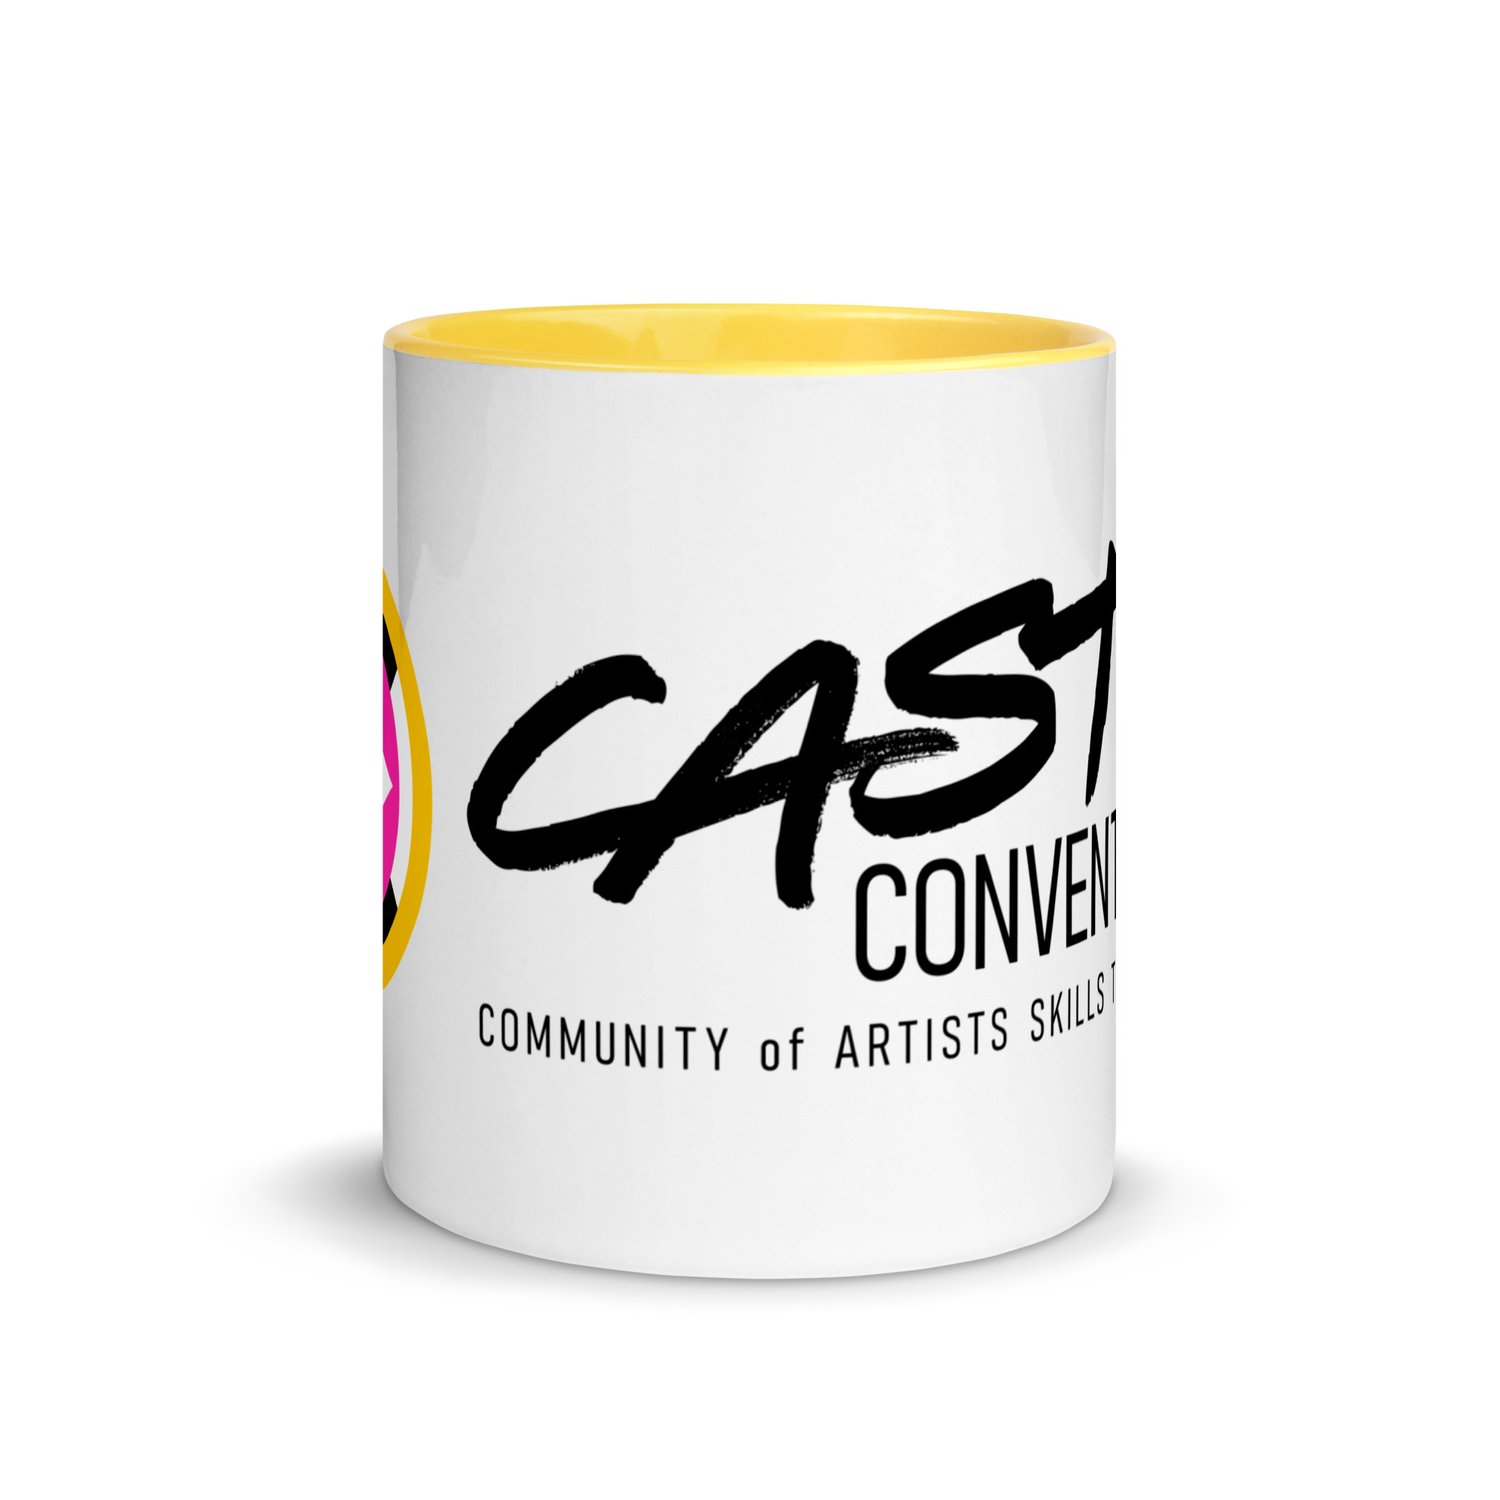 https://images.squarespace-cdn.com/content/v1/63123aac23d7713065bd08cd/1665089735874-TVKB8BLTOCWKW51ZA6PE/white-ceramic-mug-with-color-inside-yellow-11oz-front-633f40bfb3f97.jpg?format=1500w